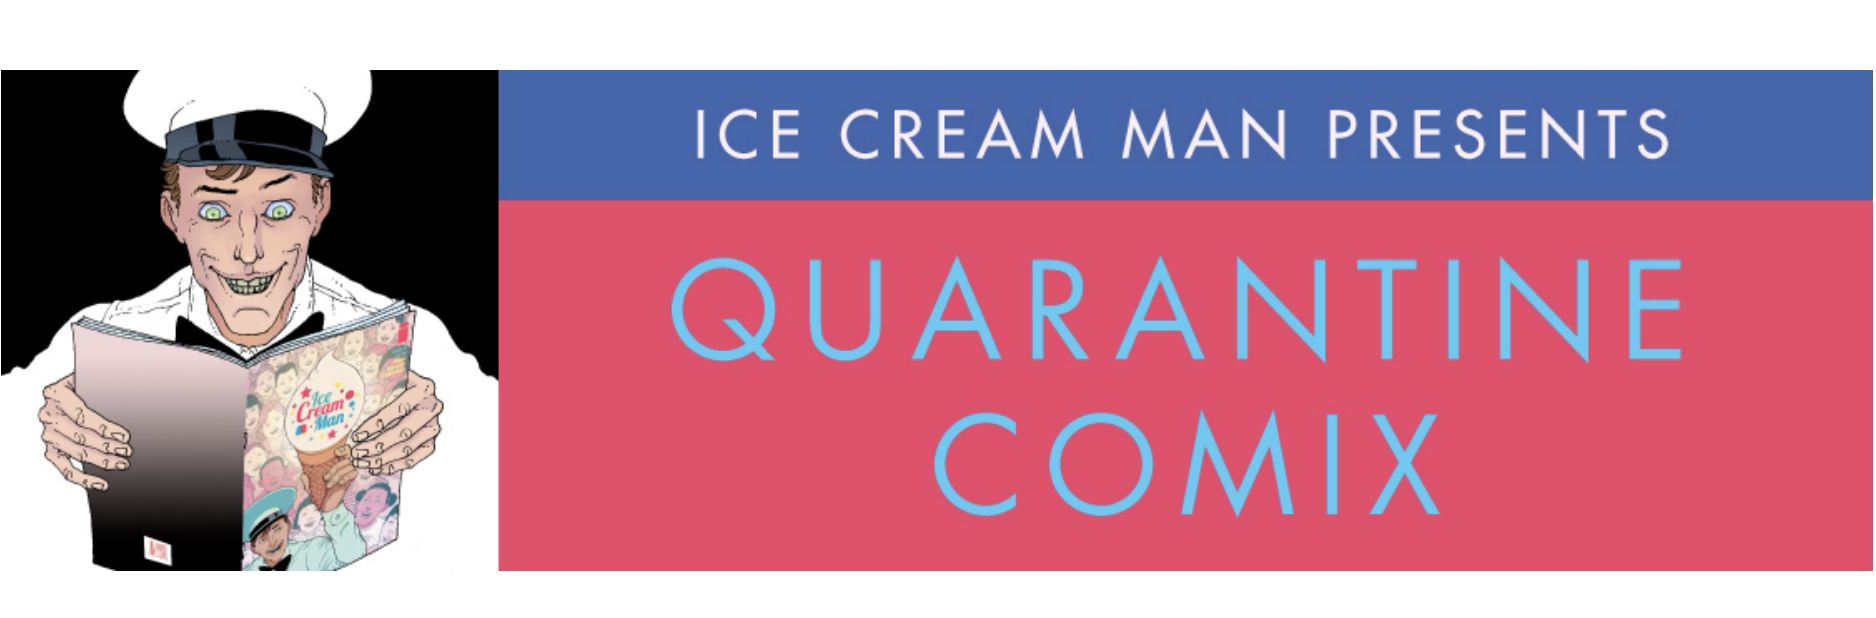 Get your comic book fix with Quarantine Comix presented by Image Comics and Ice Cream Man